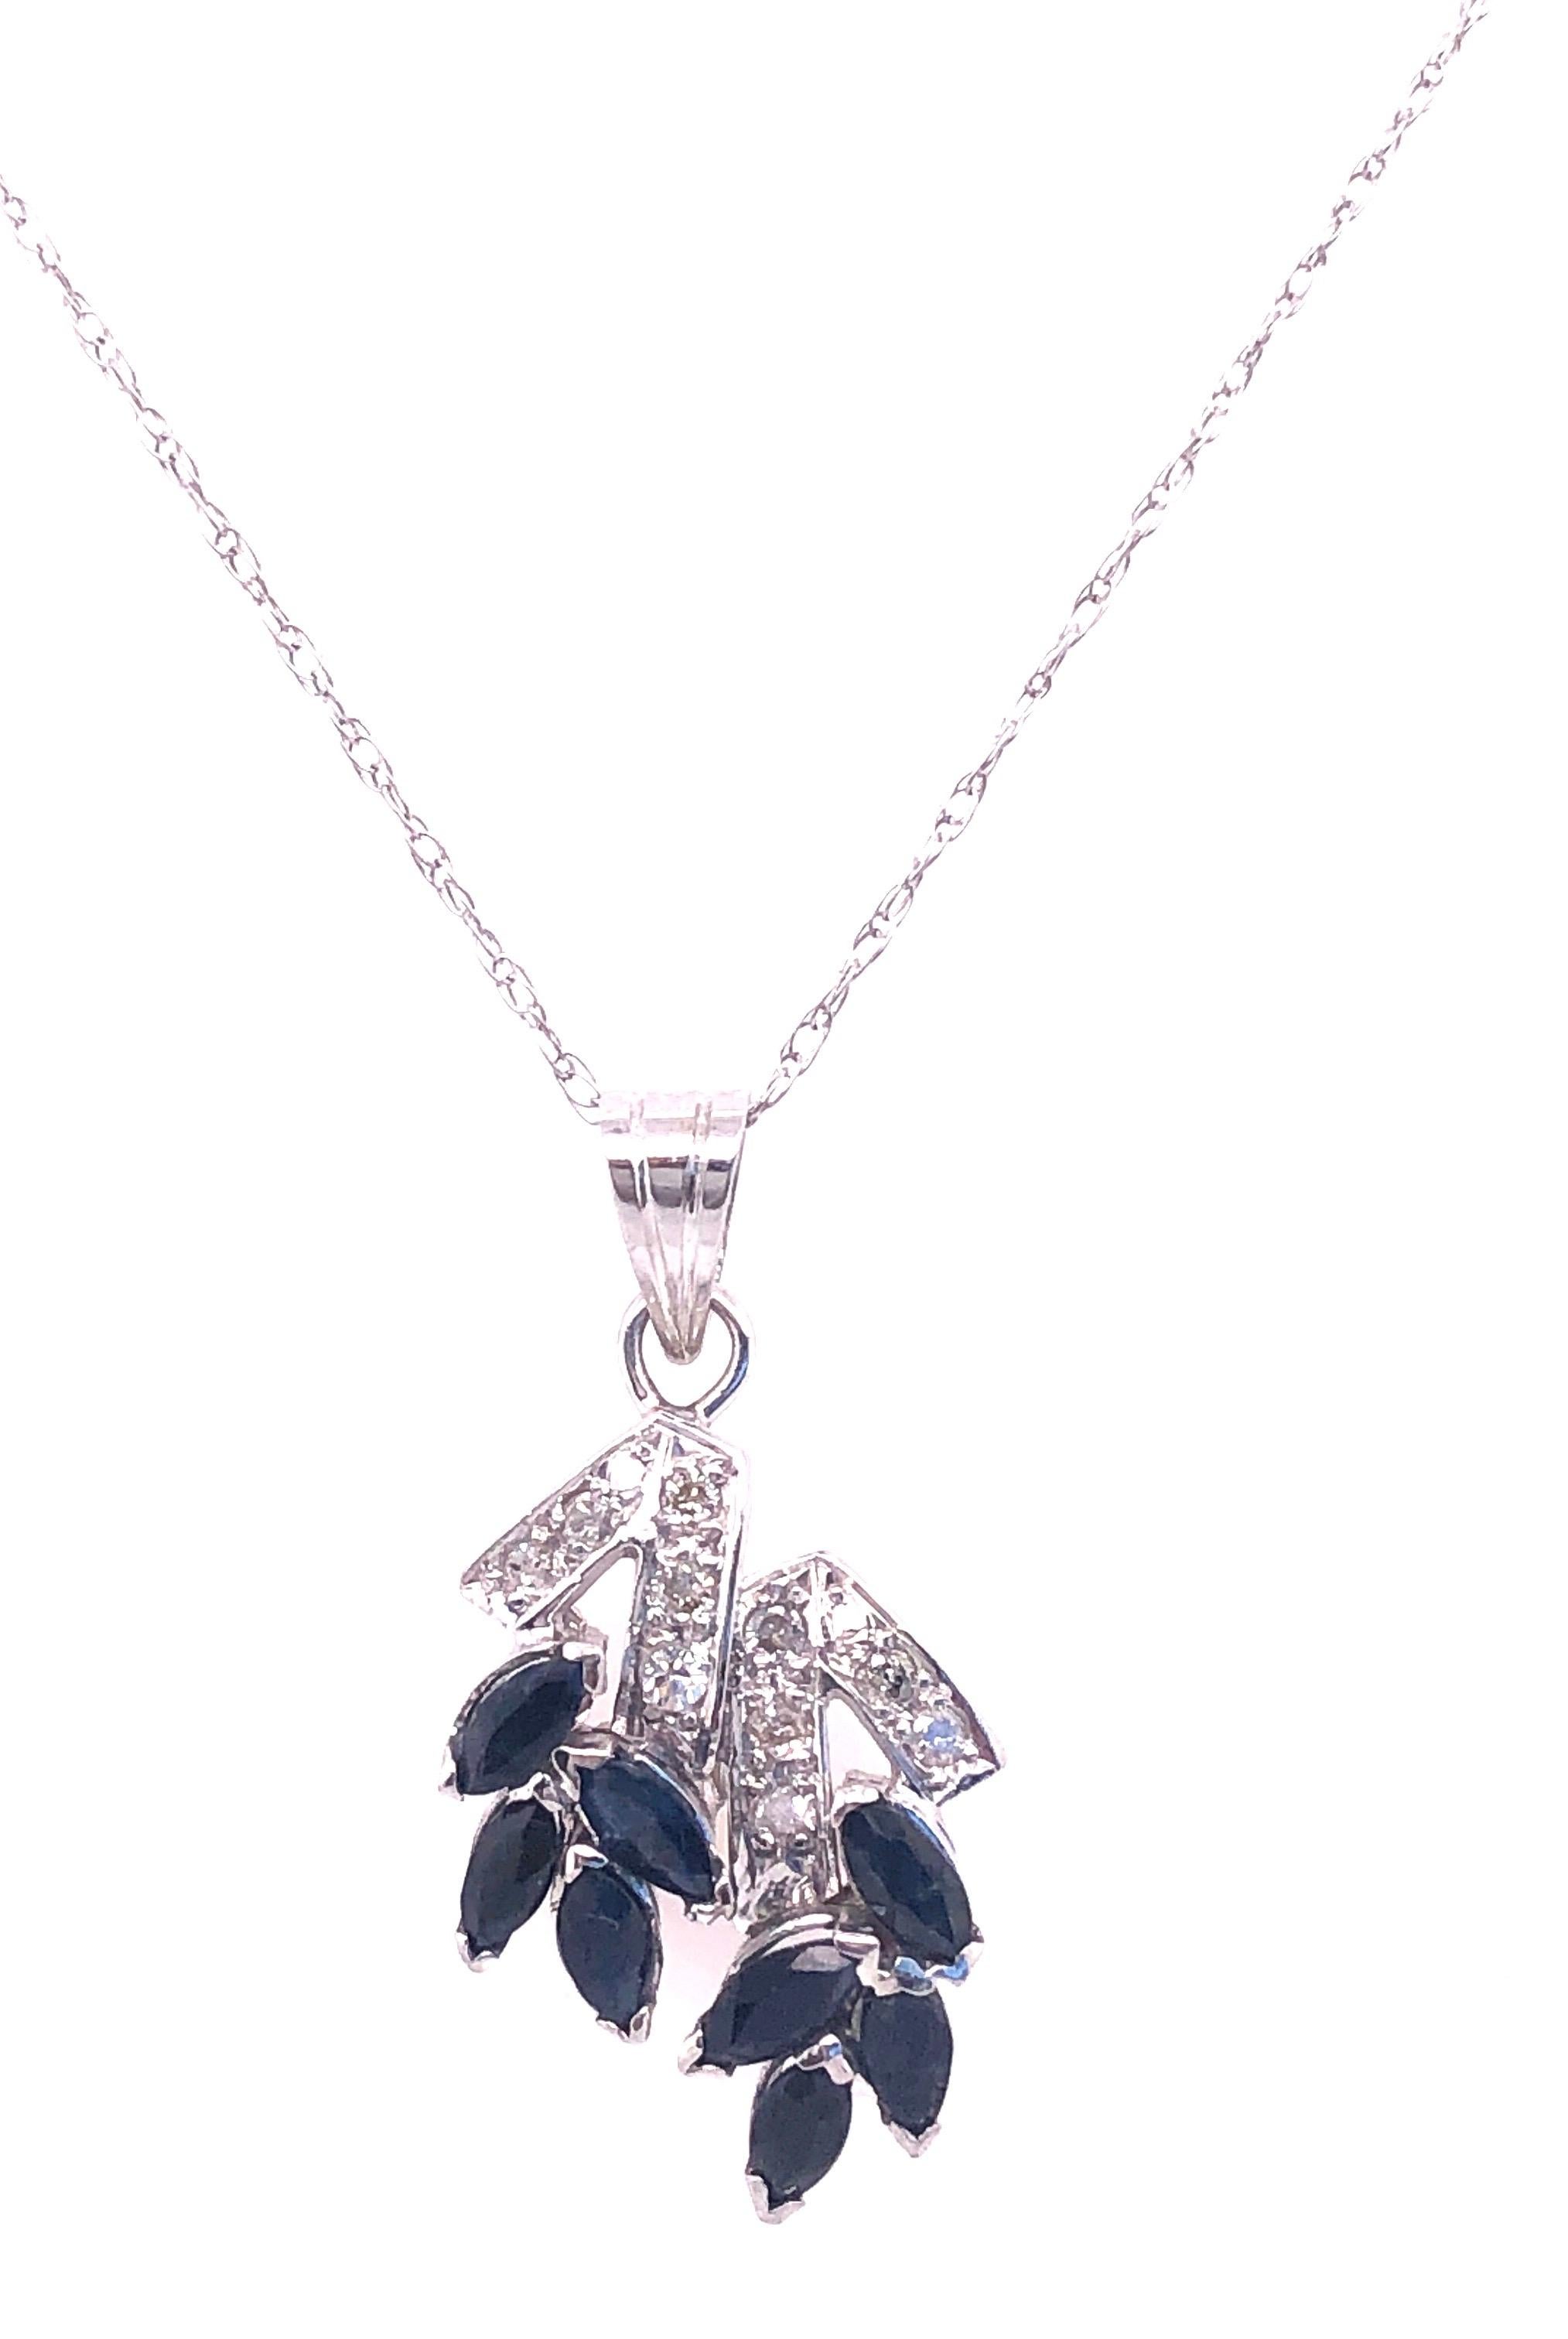 14 Karat White Gold Necklace with Marquise Sapphires and Diamond Pendant 2